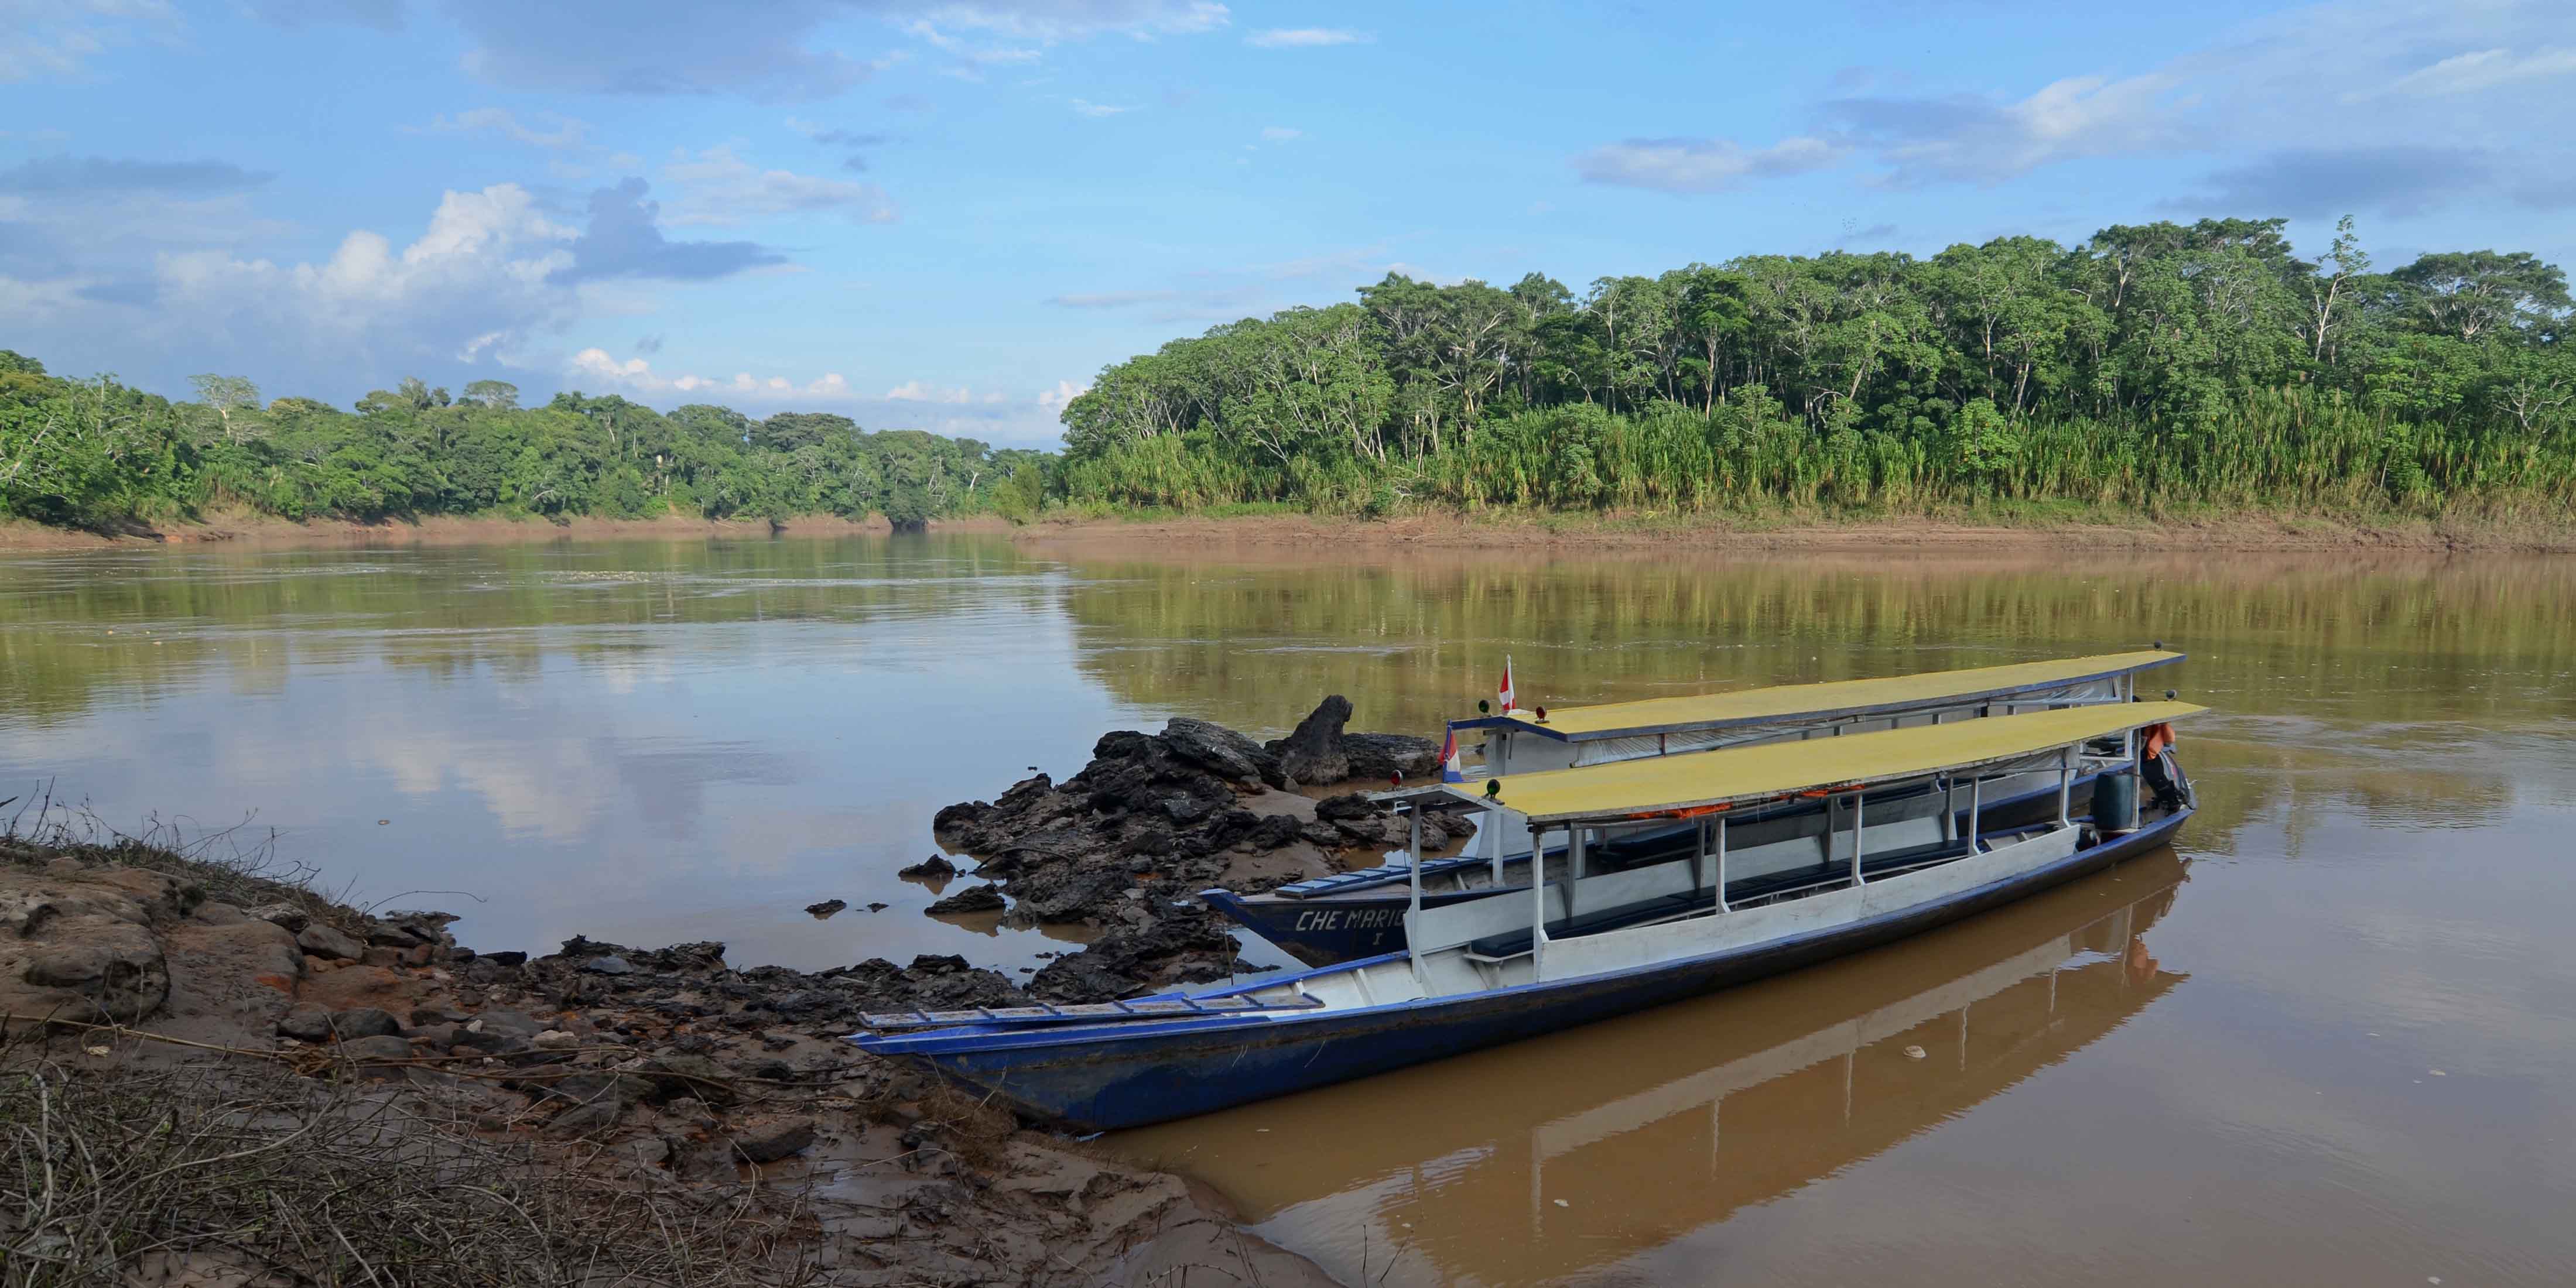 FEATURE-Peru's 'Wonder Woman' battles illegal gold mining in the Amazon